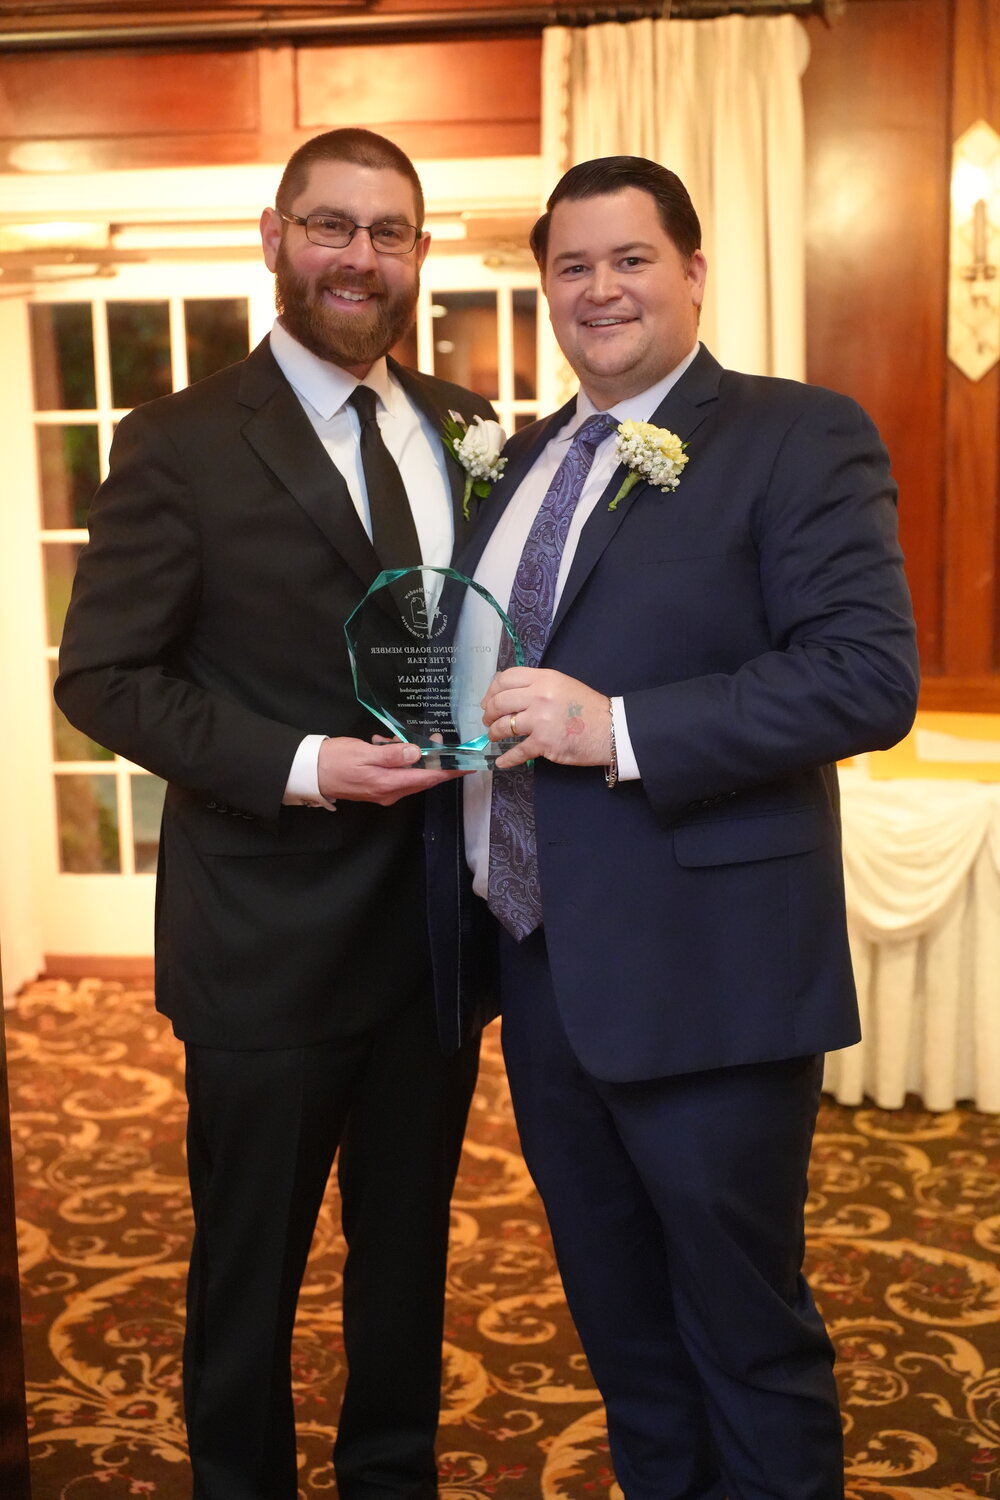 James Skinner, immediate past president of the chamber, with Ryan Parkman, who was named Board Member of the Year.